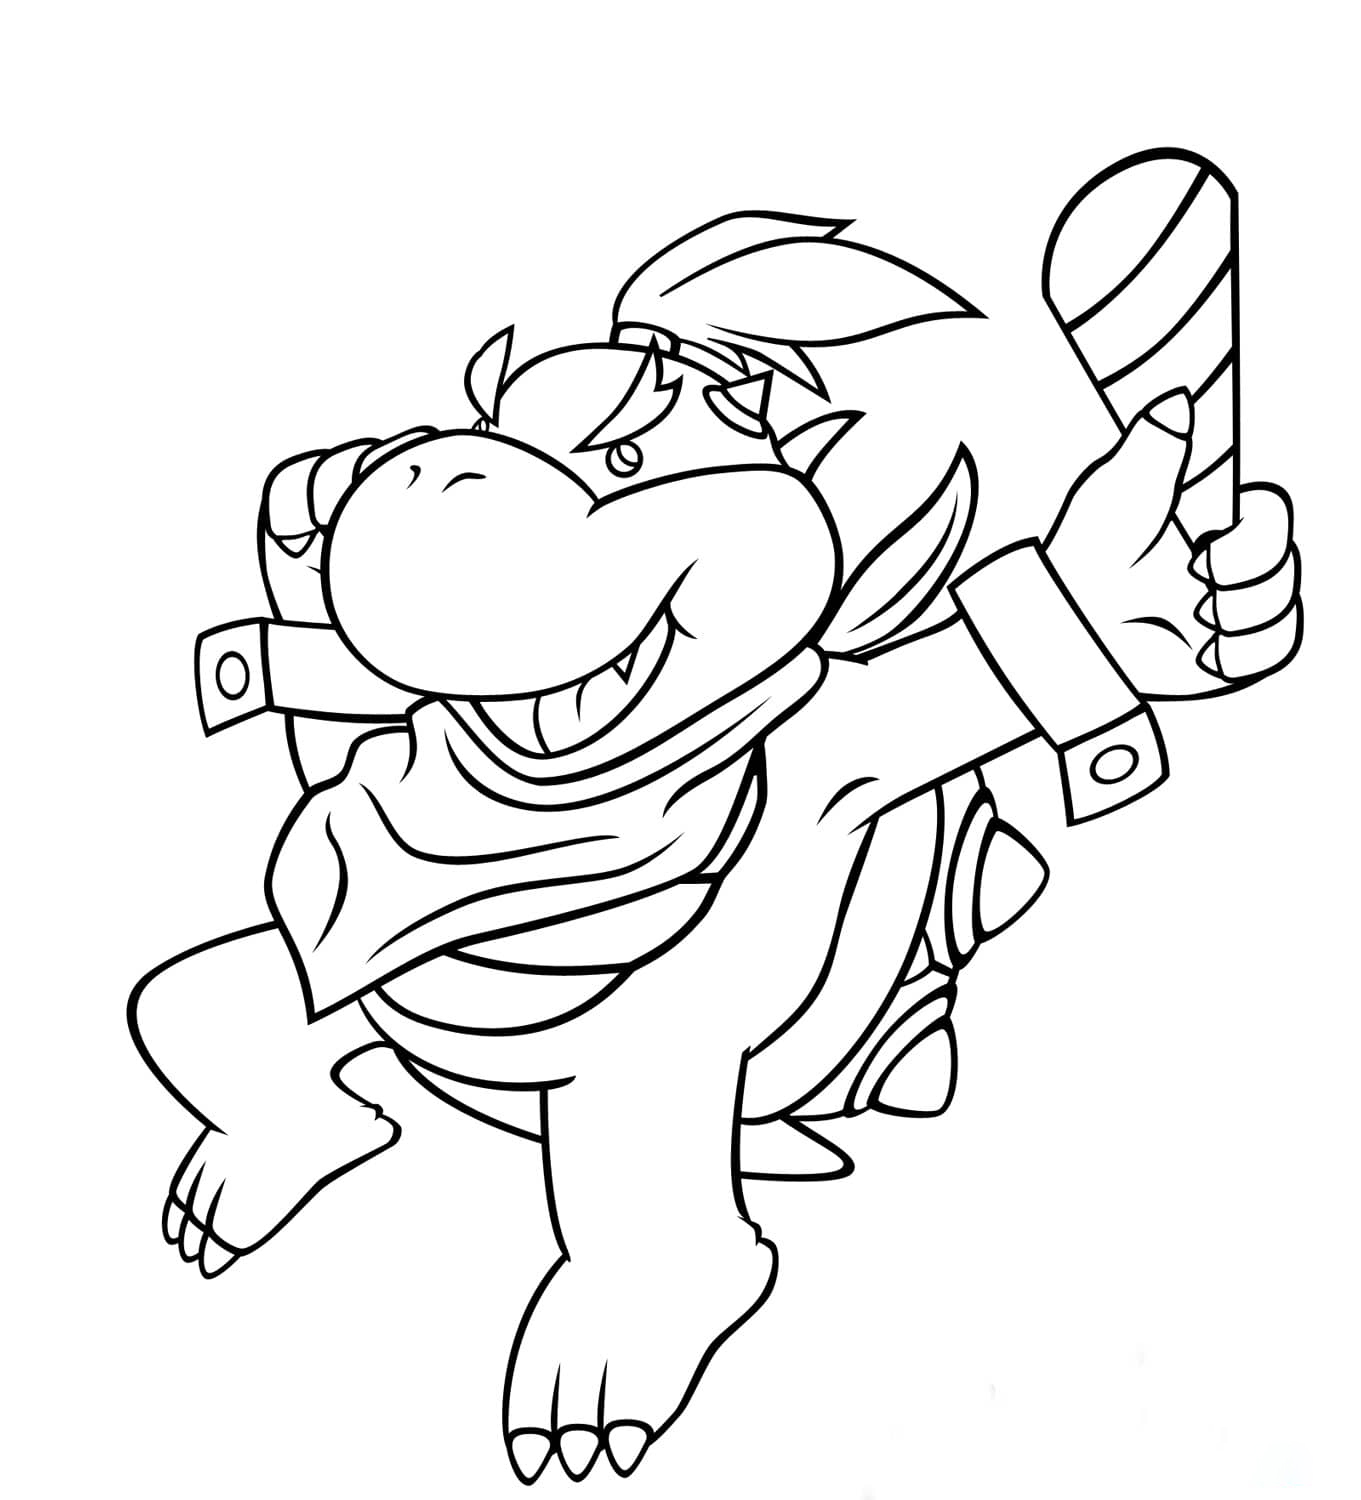 Bowser Jr. is holding torch Coloring Page